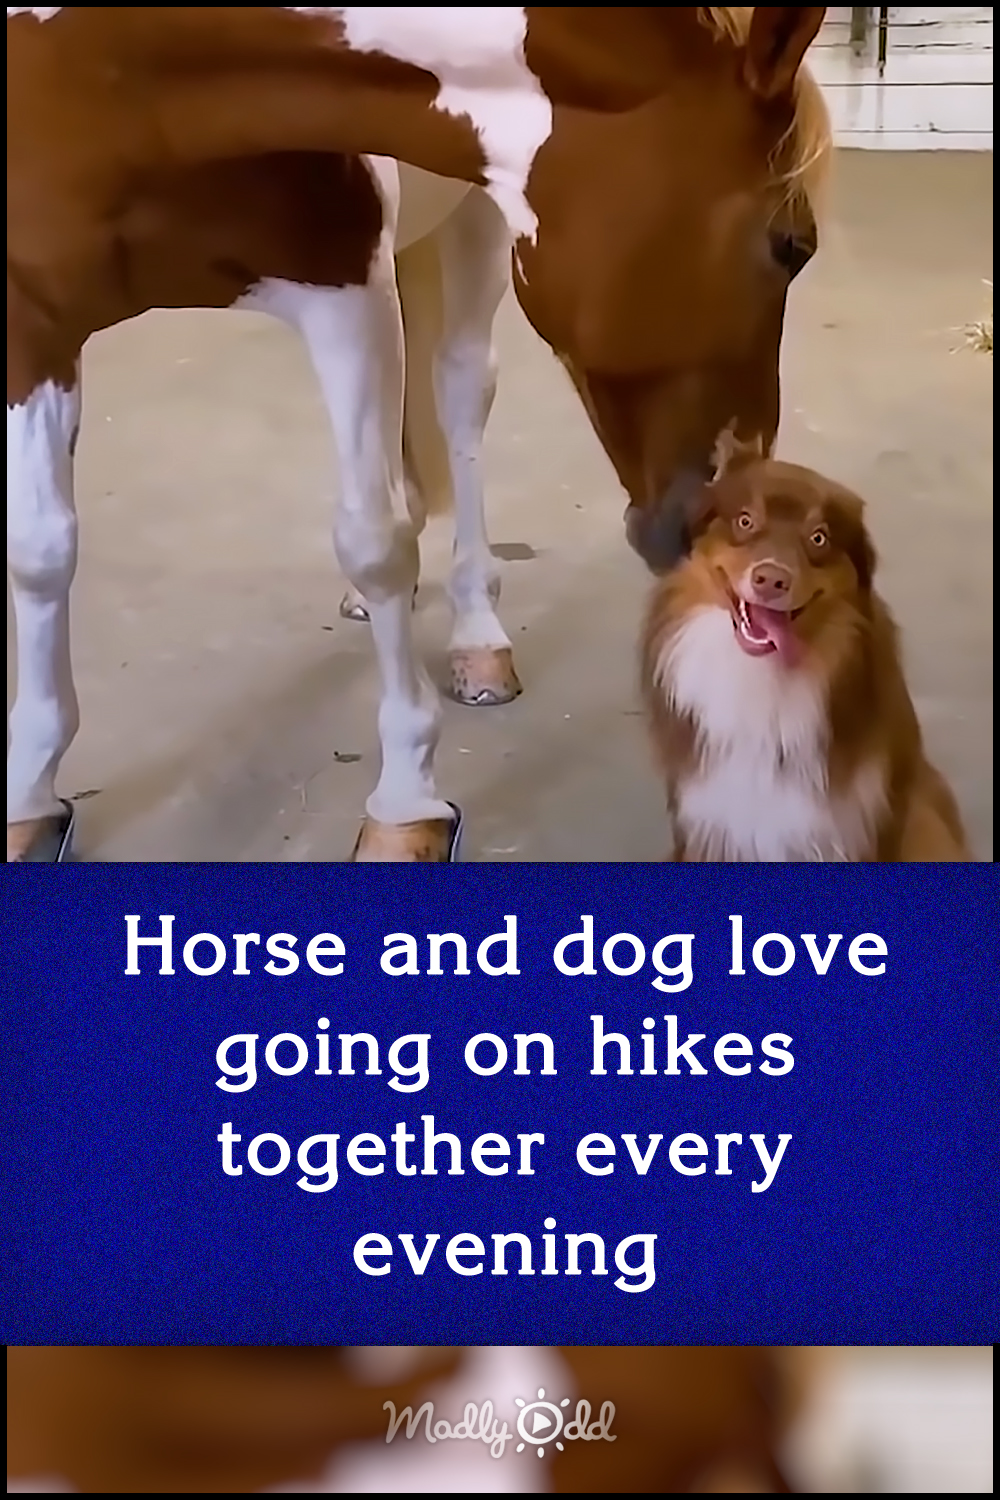 Horse and dog love going on hikes together every evening